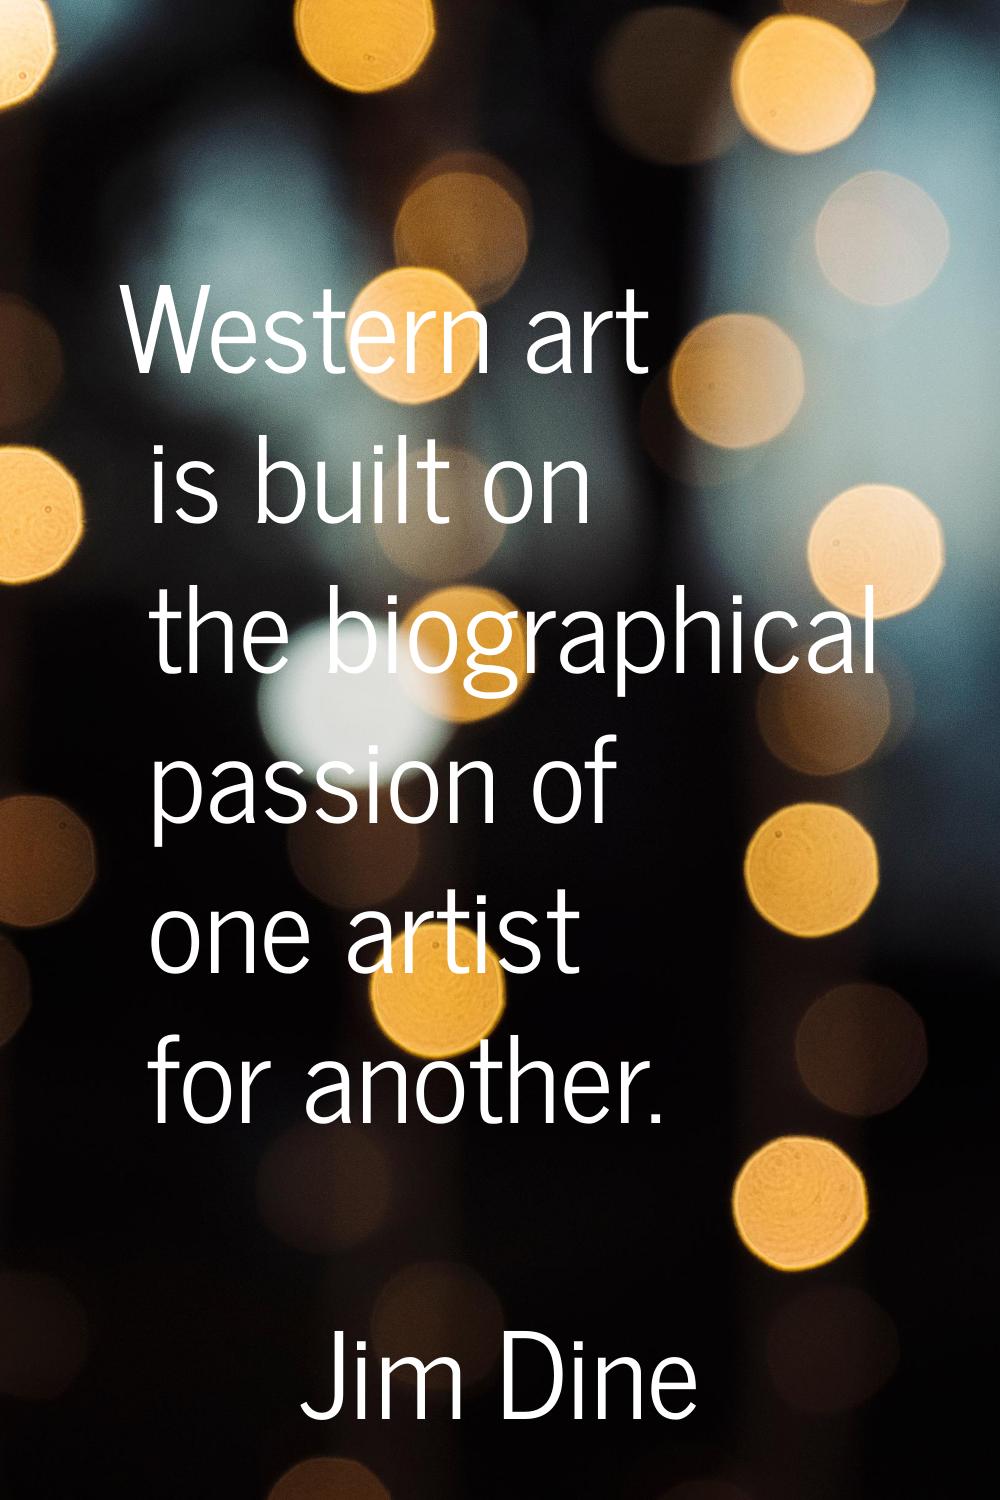 Western art is built on the biographical passion of one artist for another.